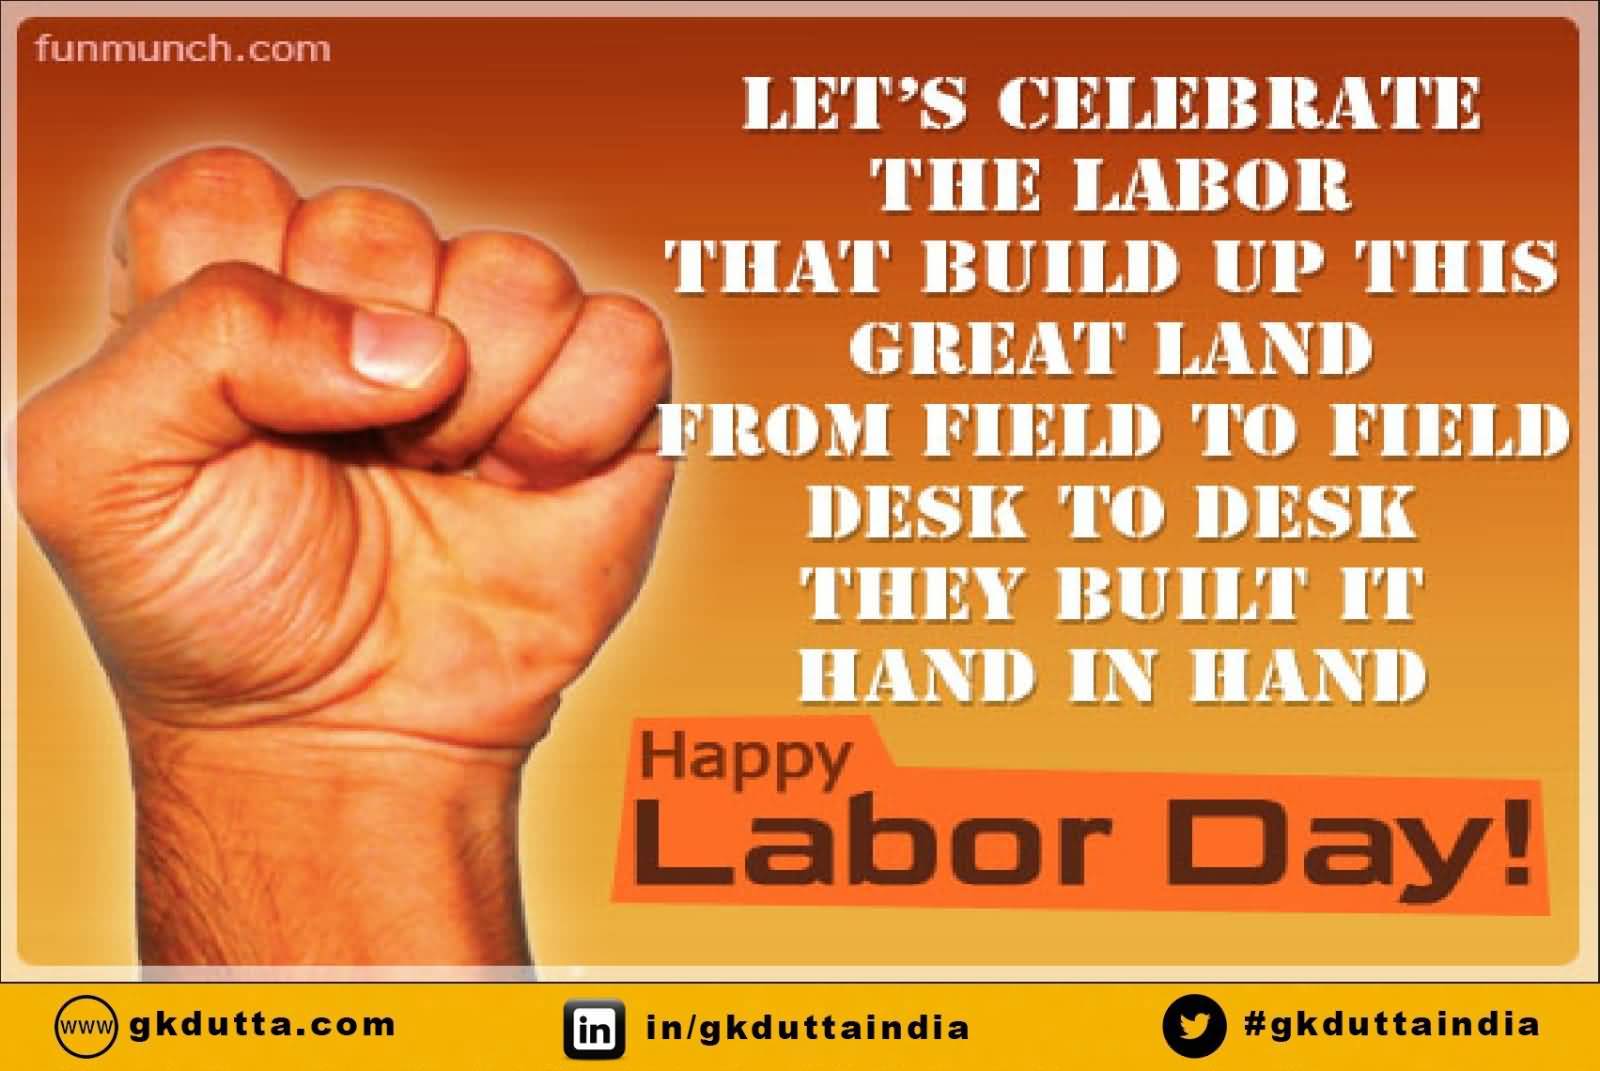 Let's Celebrate The Labor That Build Up This Great Land From Field To Field Desk To Desk They Built It Hand In Hand Happy Labor Day